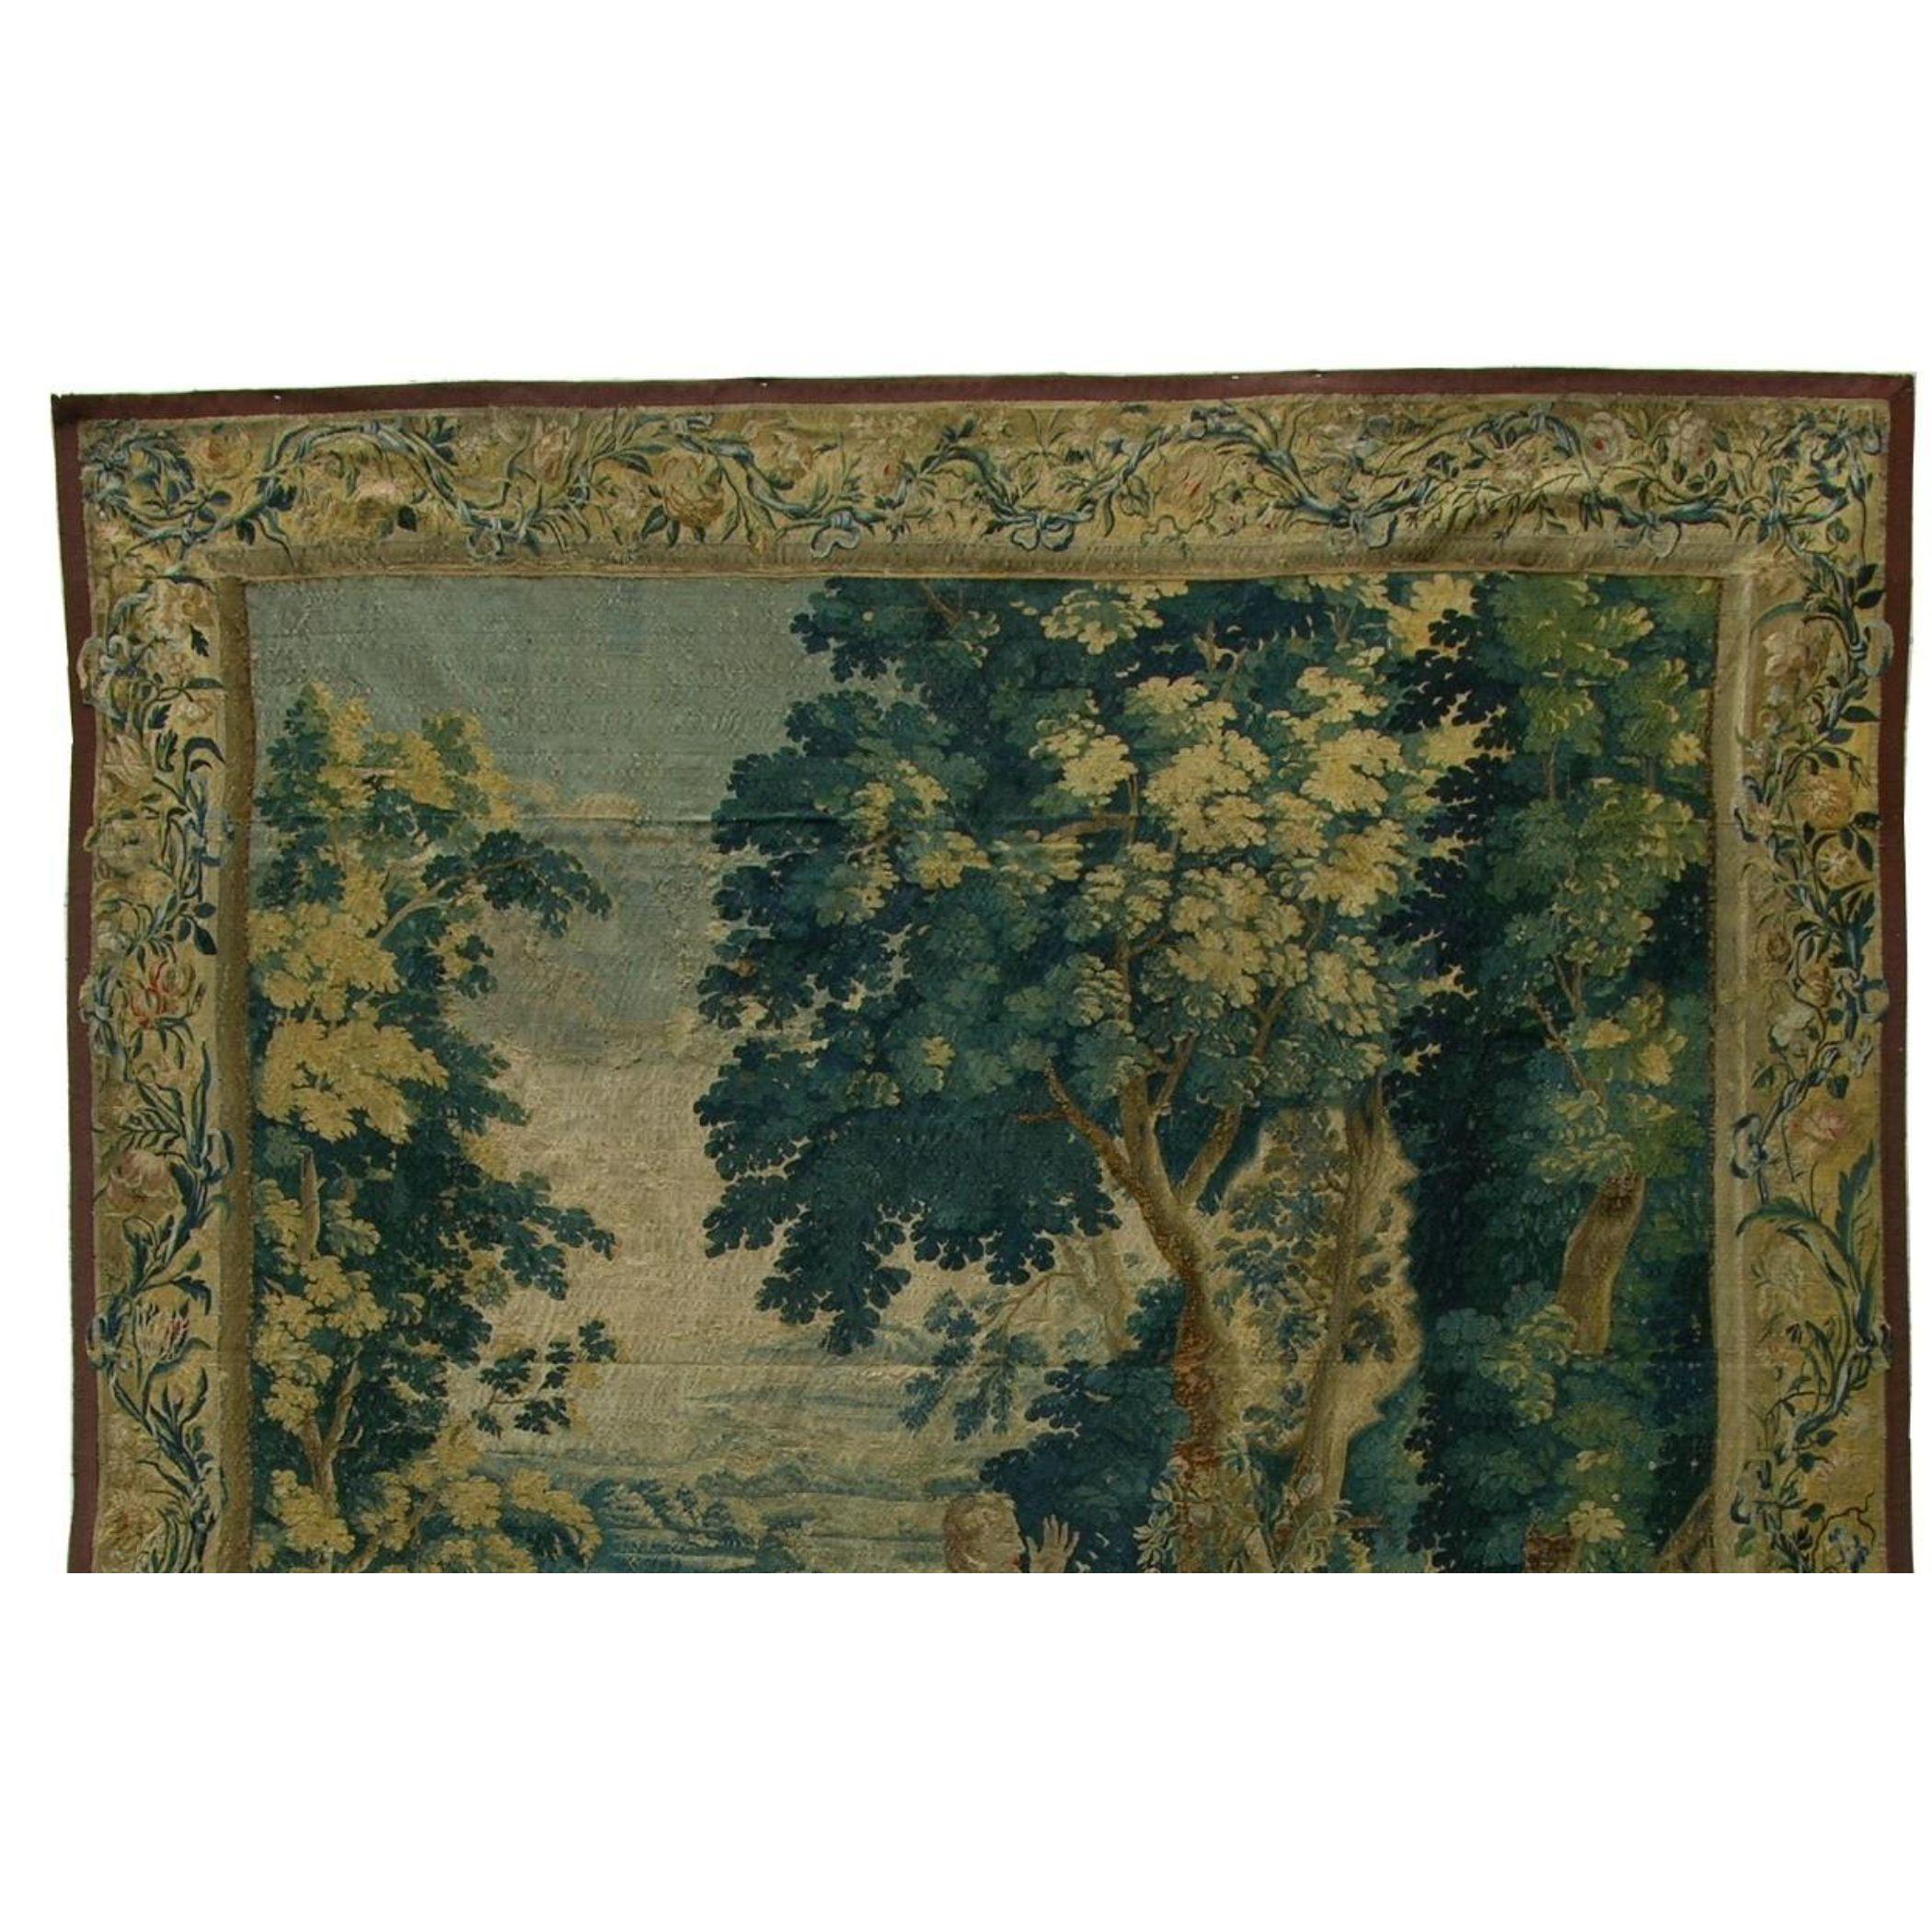 Other Late 17th Century Antique Brussels Tapestry 8'10